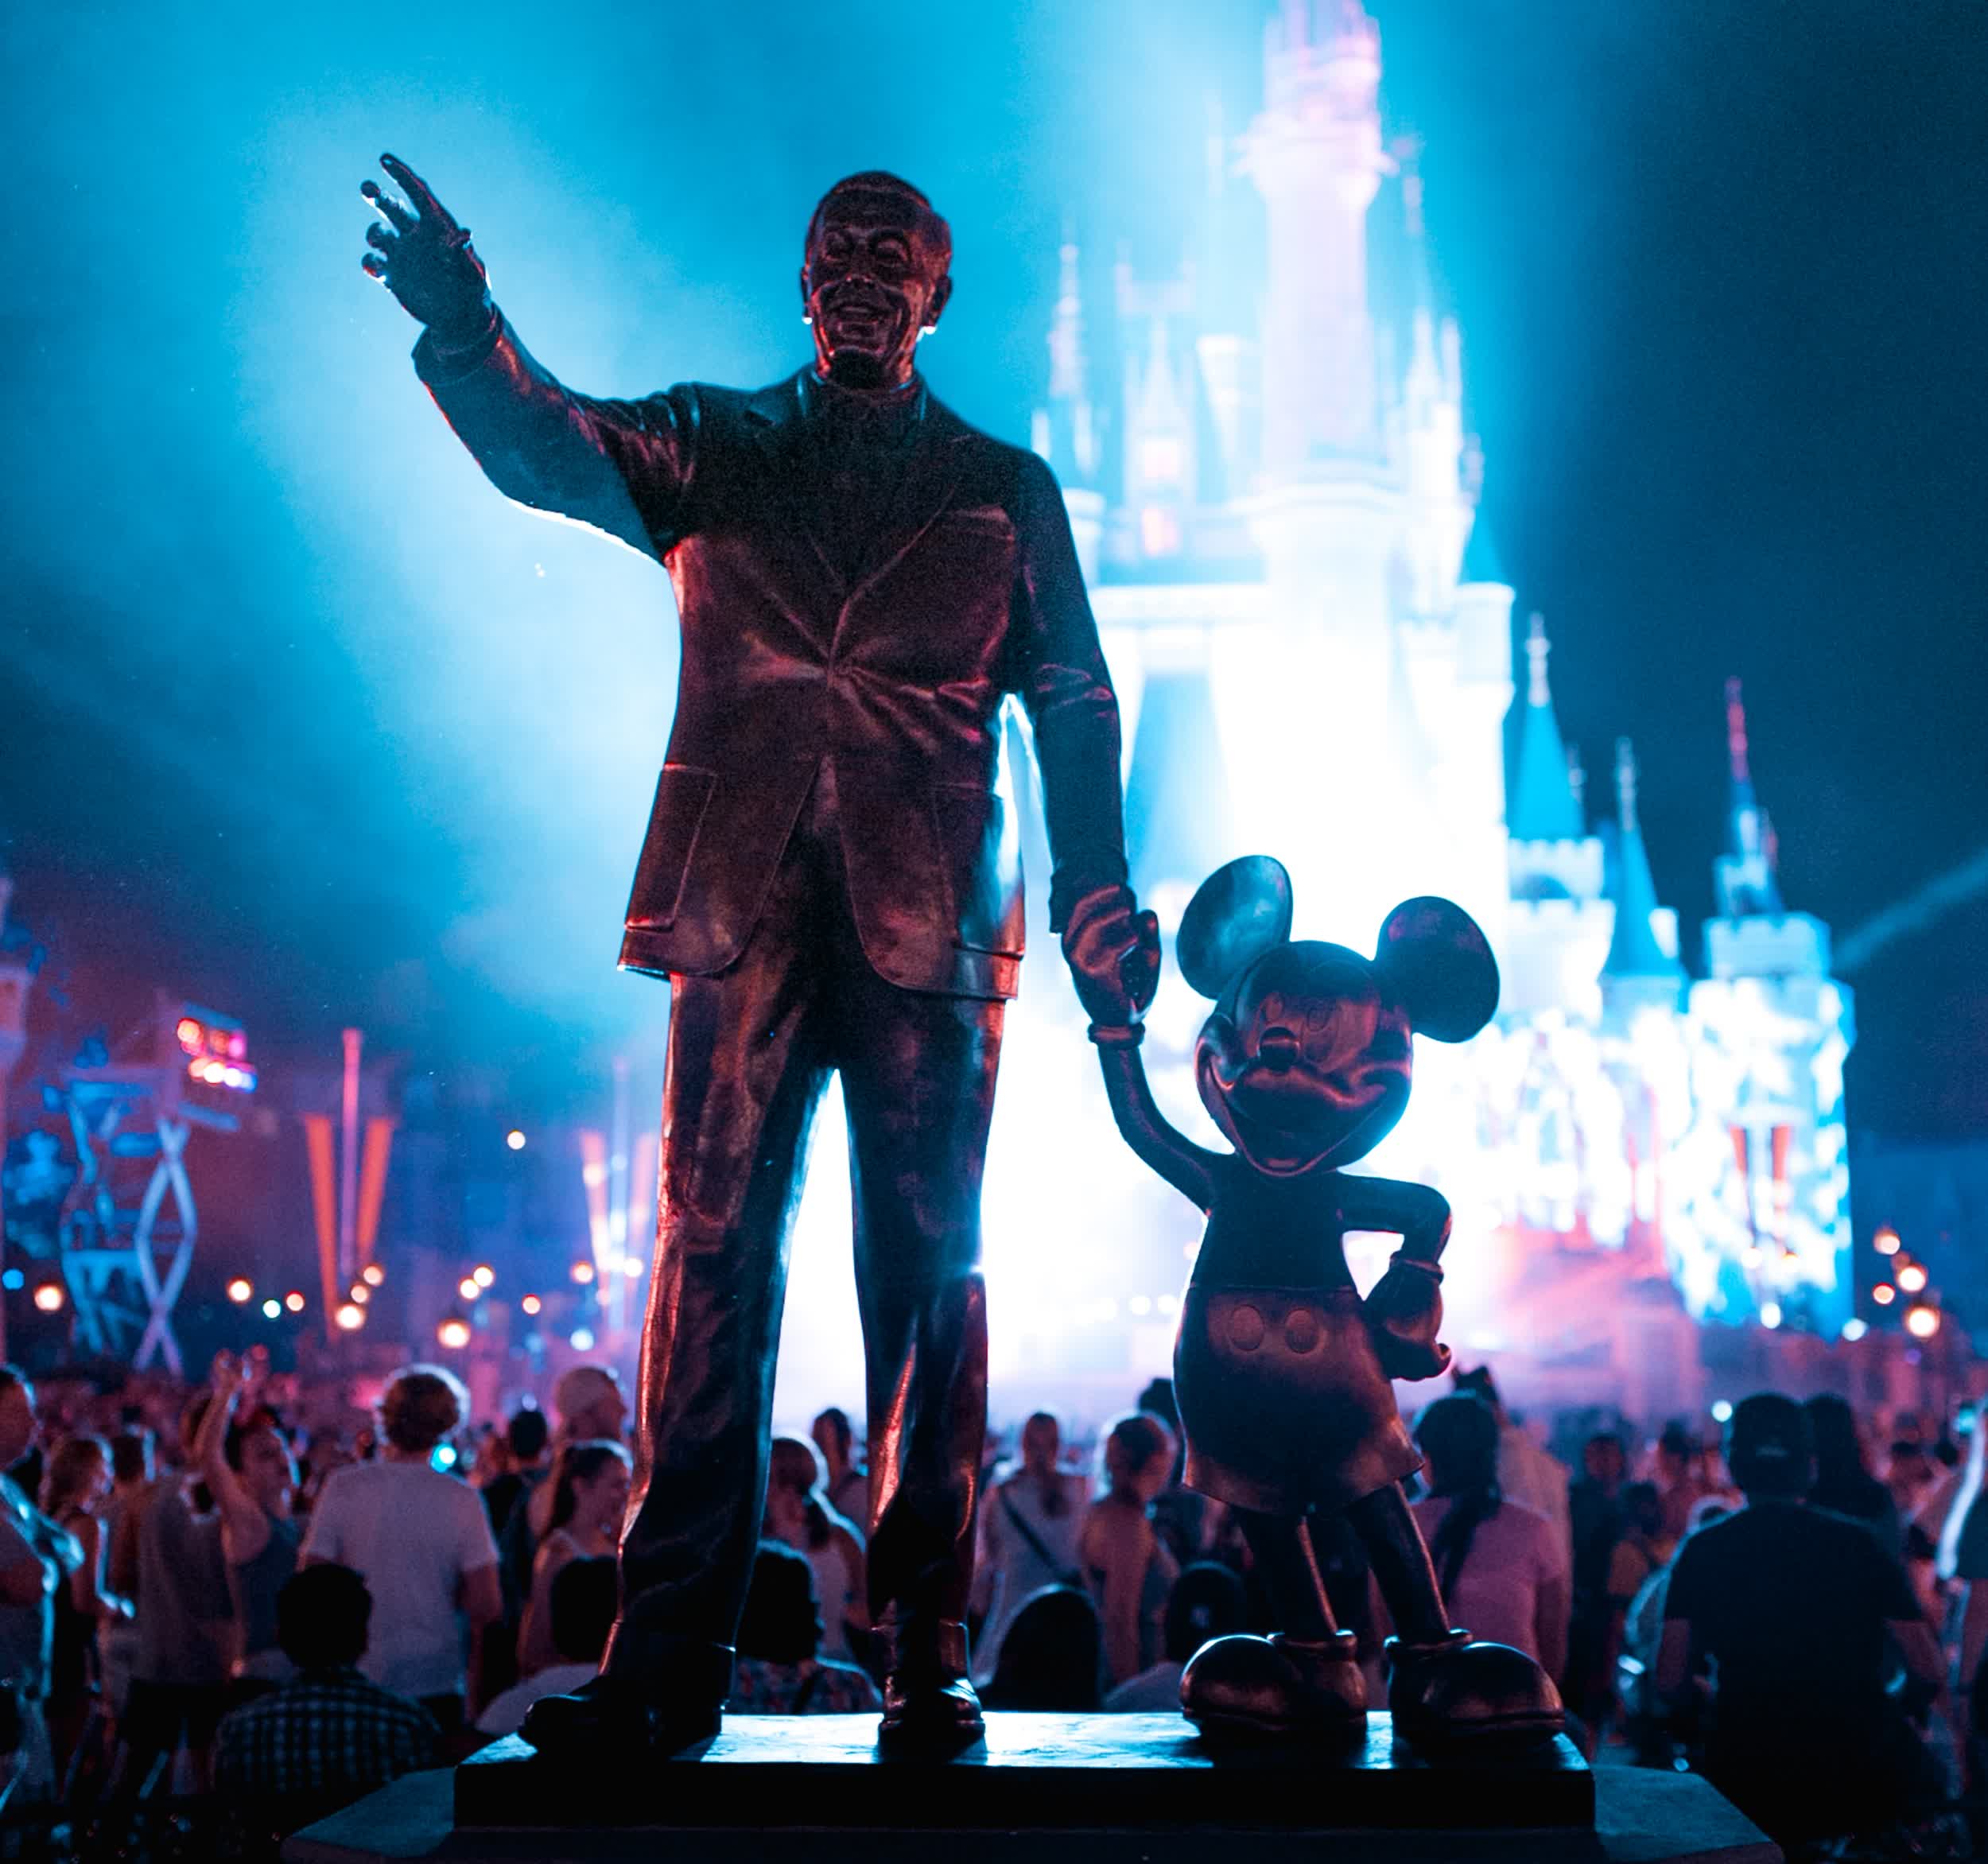 Disney+ misses the mark due to slowing subscriber growth